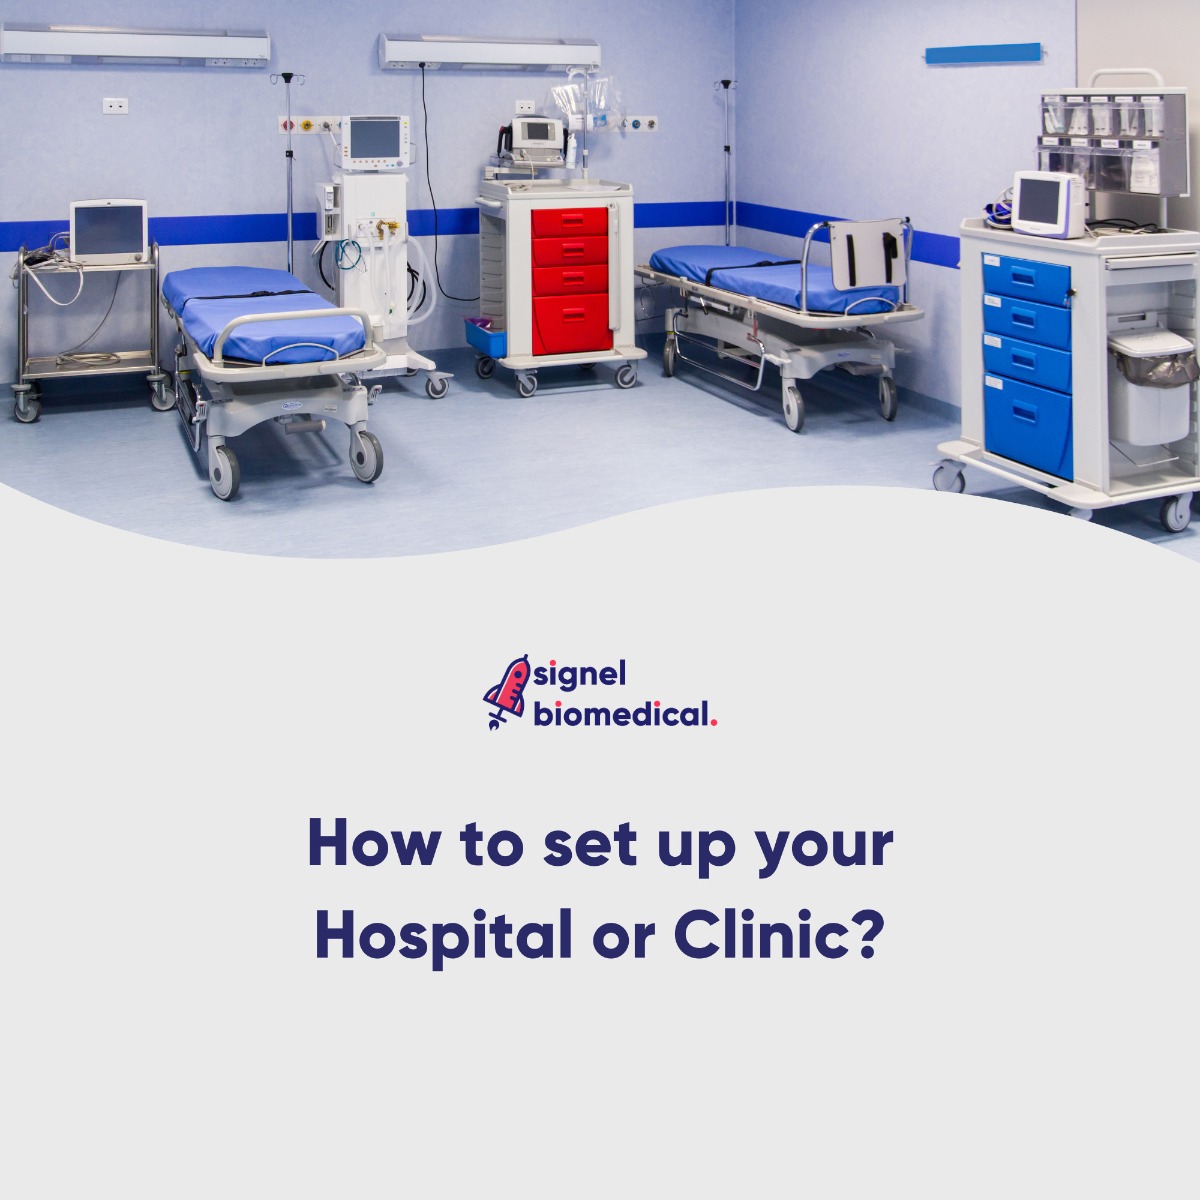 How to set up your Hospital/Clinic?